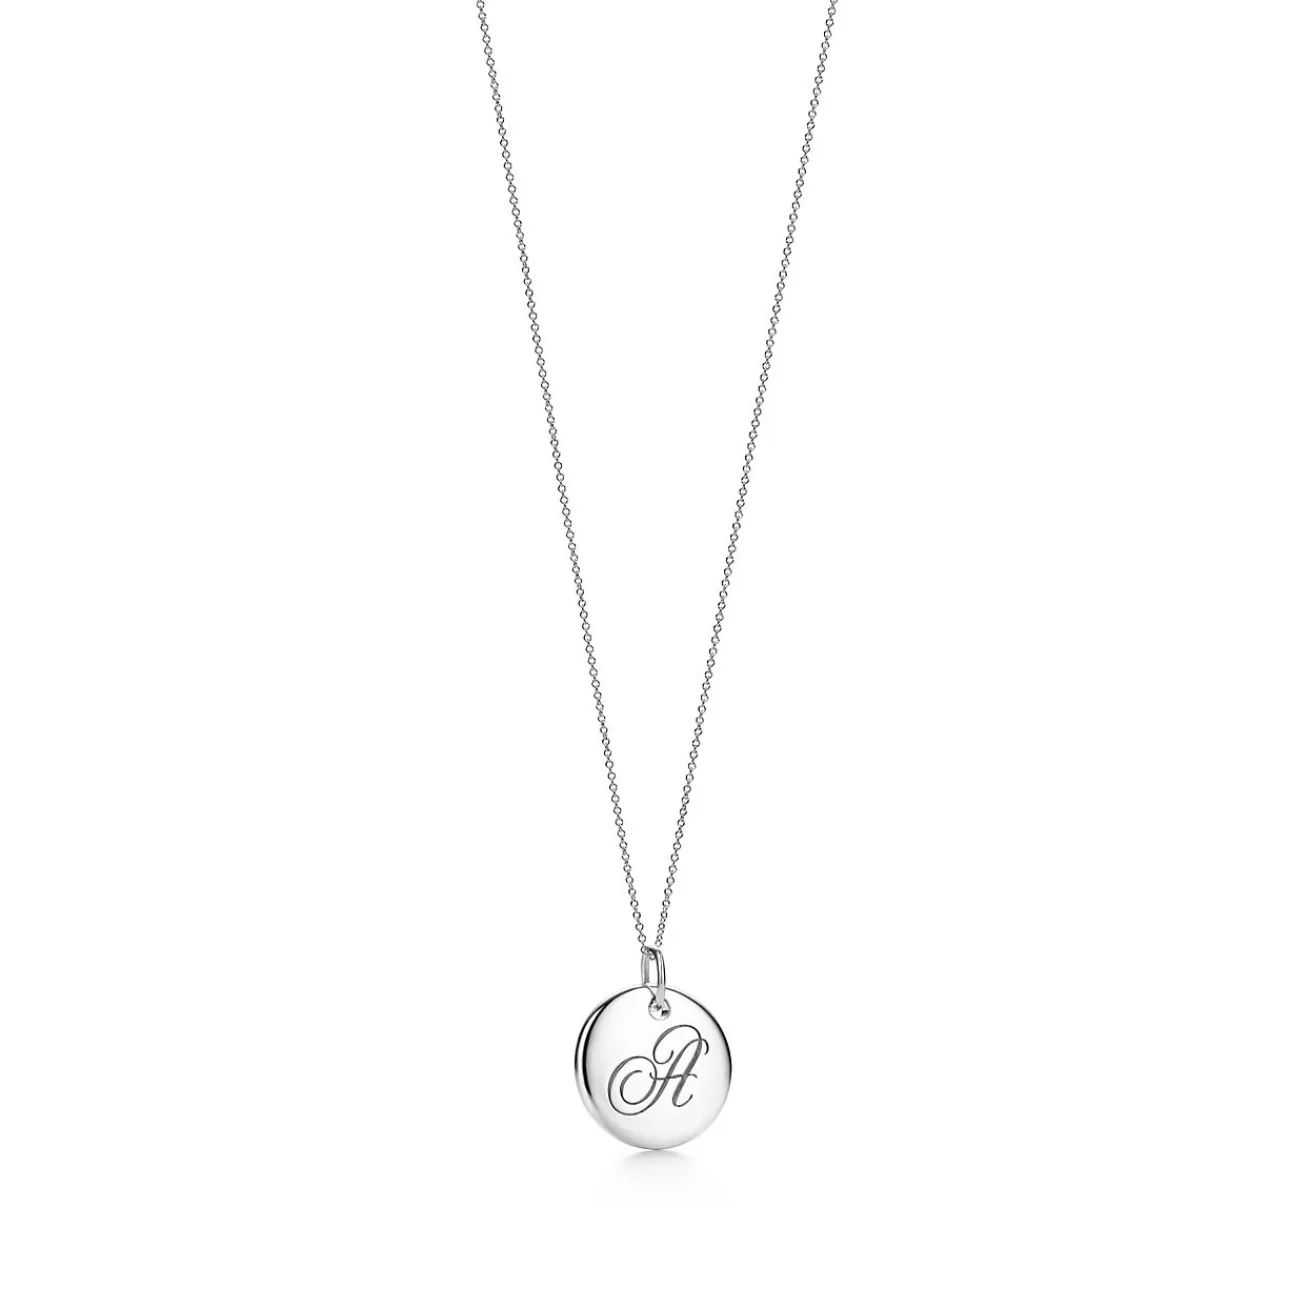 Tiffany & Co. Tiffany Notes alphabet disc charm in silver on a chain. Letters A-Z available. | ^ Necklaces & Pendants | Gifts for Her